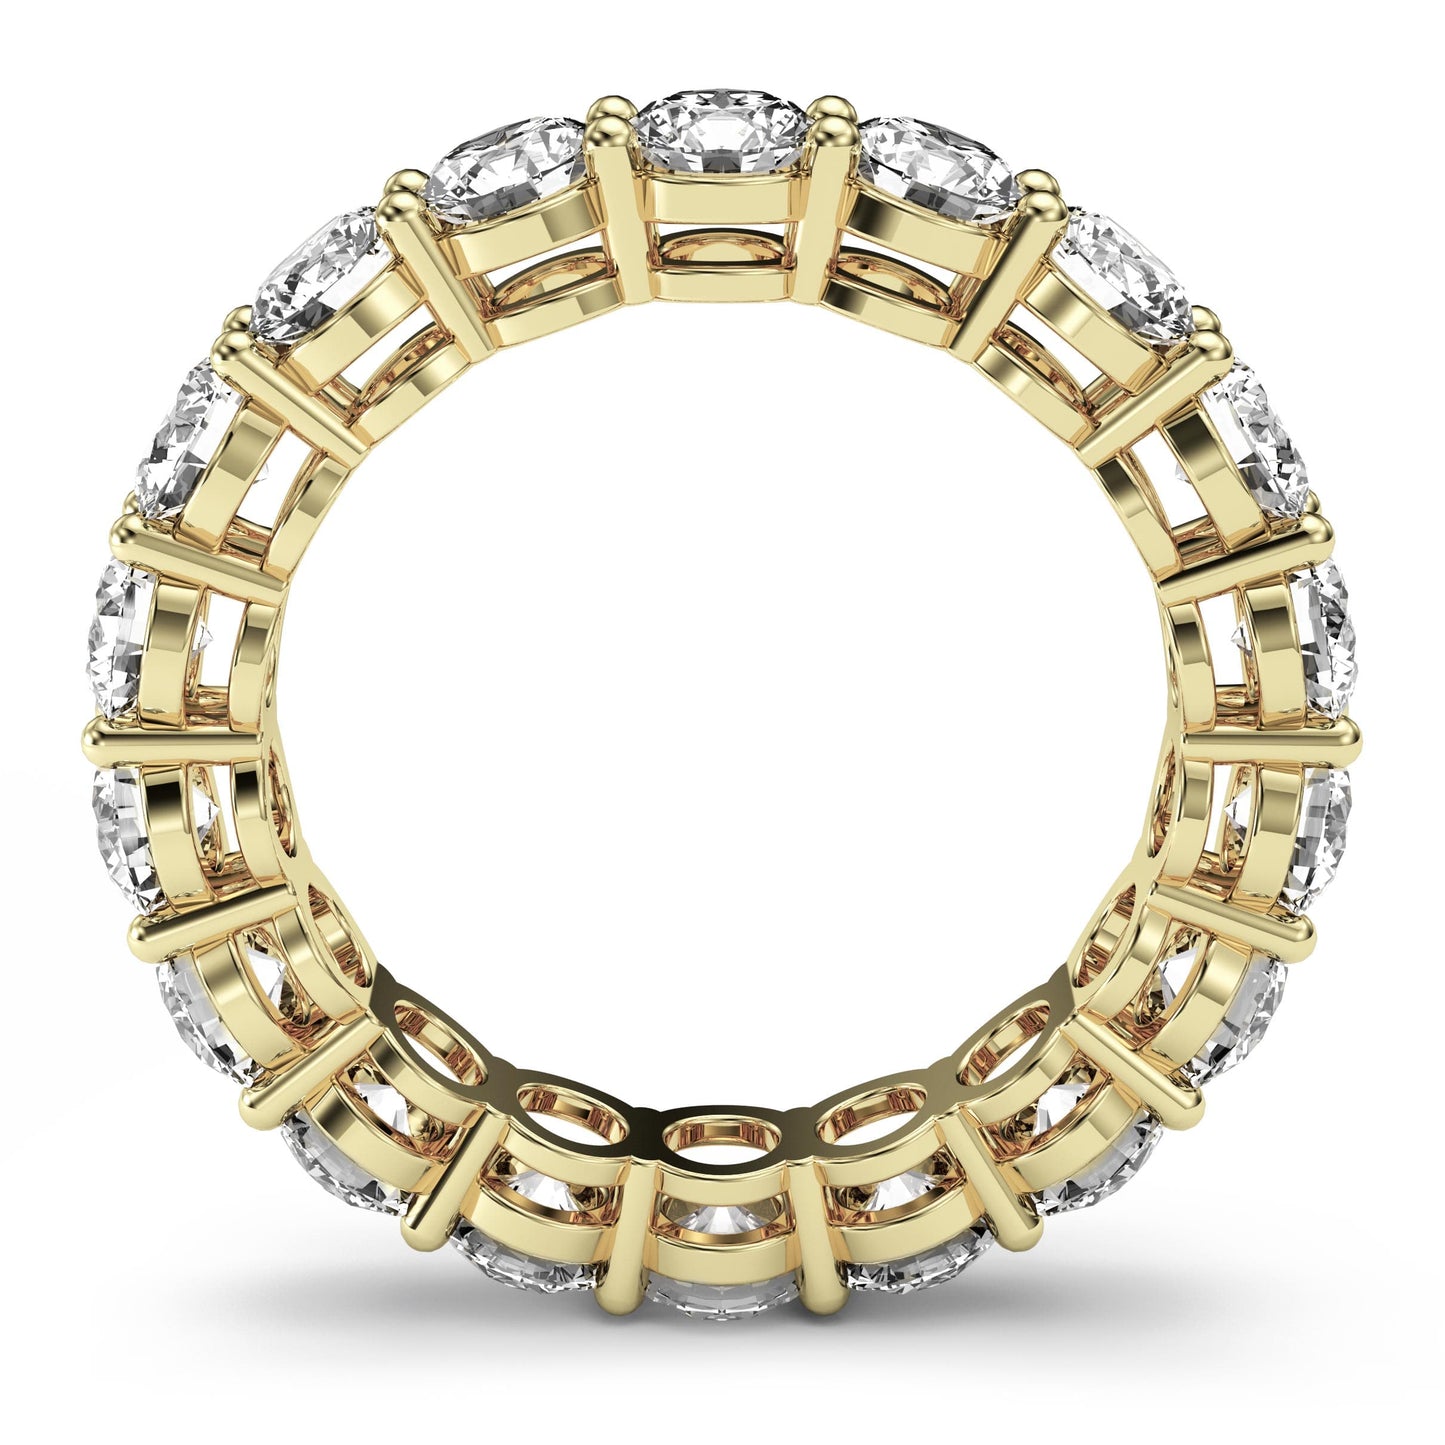 3ct Shared Prong Diamond Eternity Ring in 14k Gold